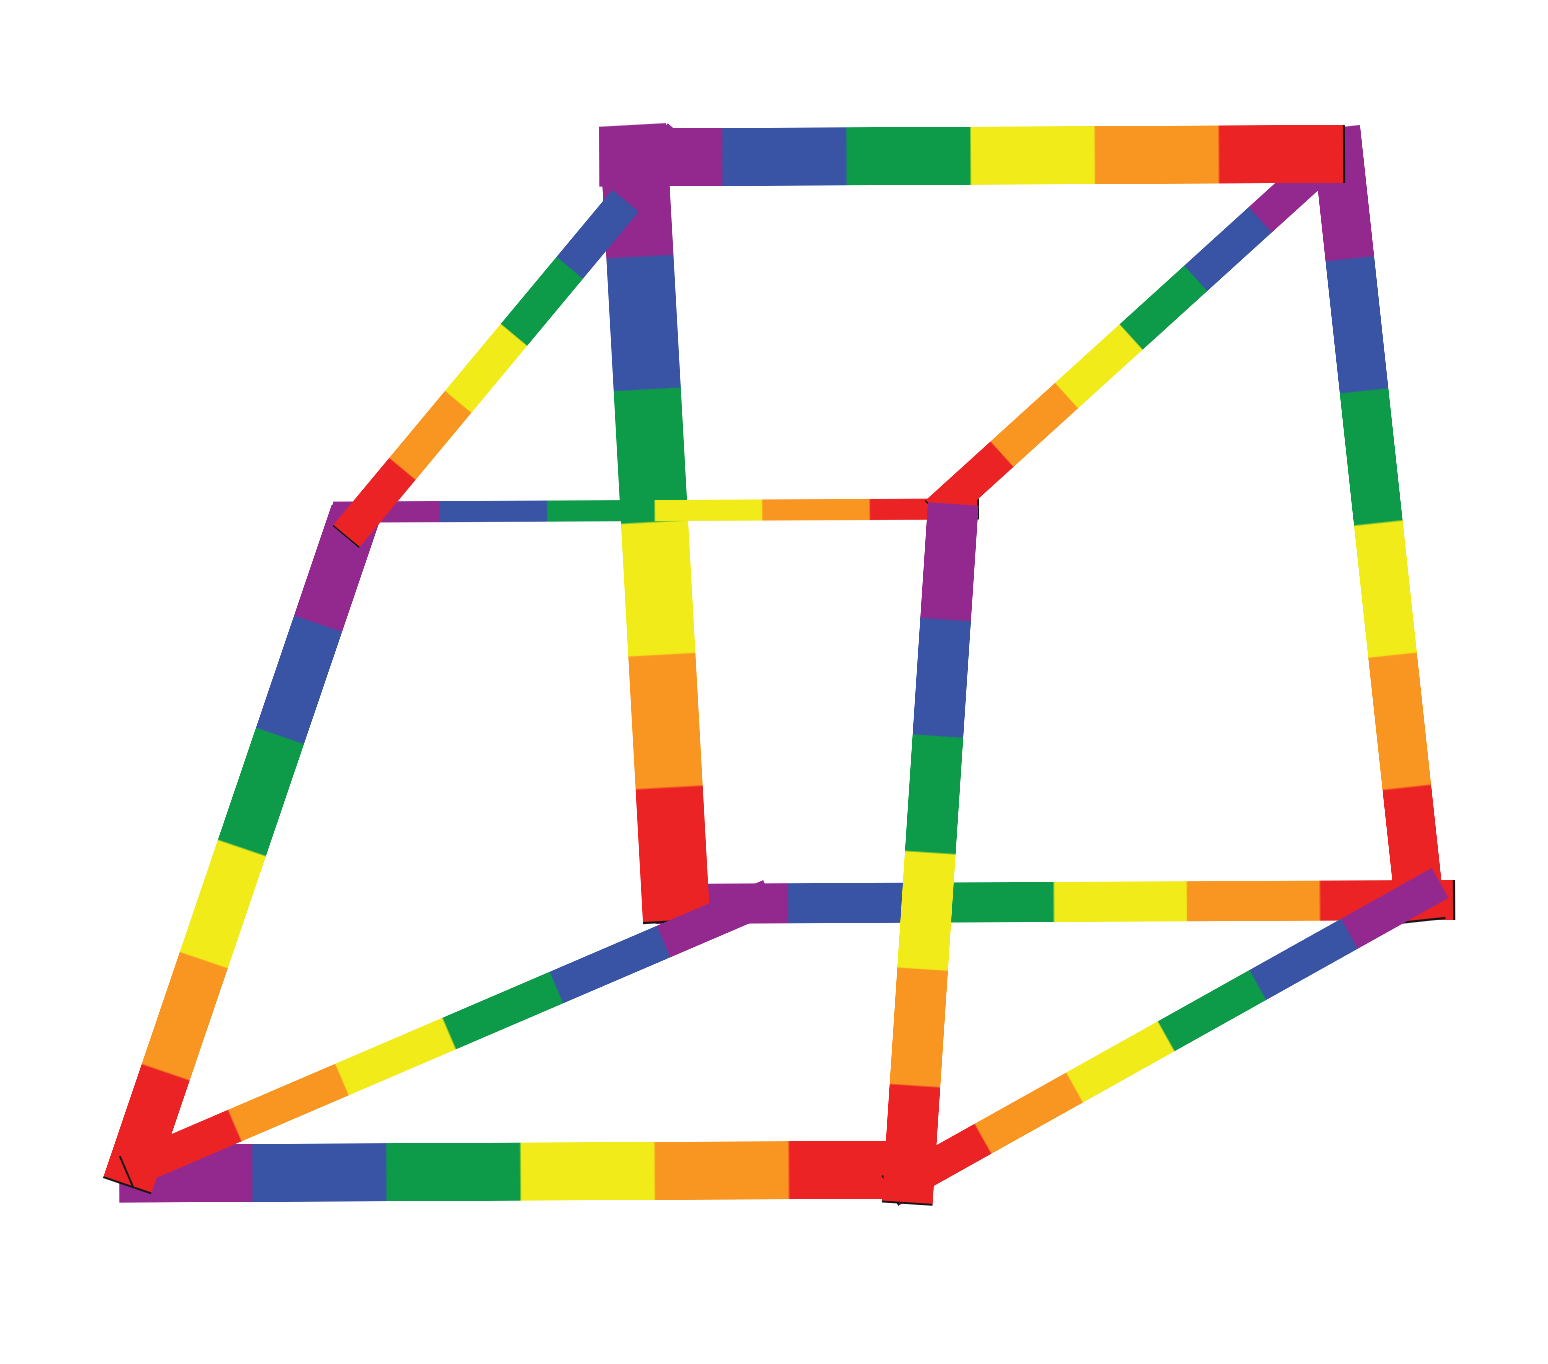 A cube defined by its edges, each edge is a rainbow